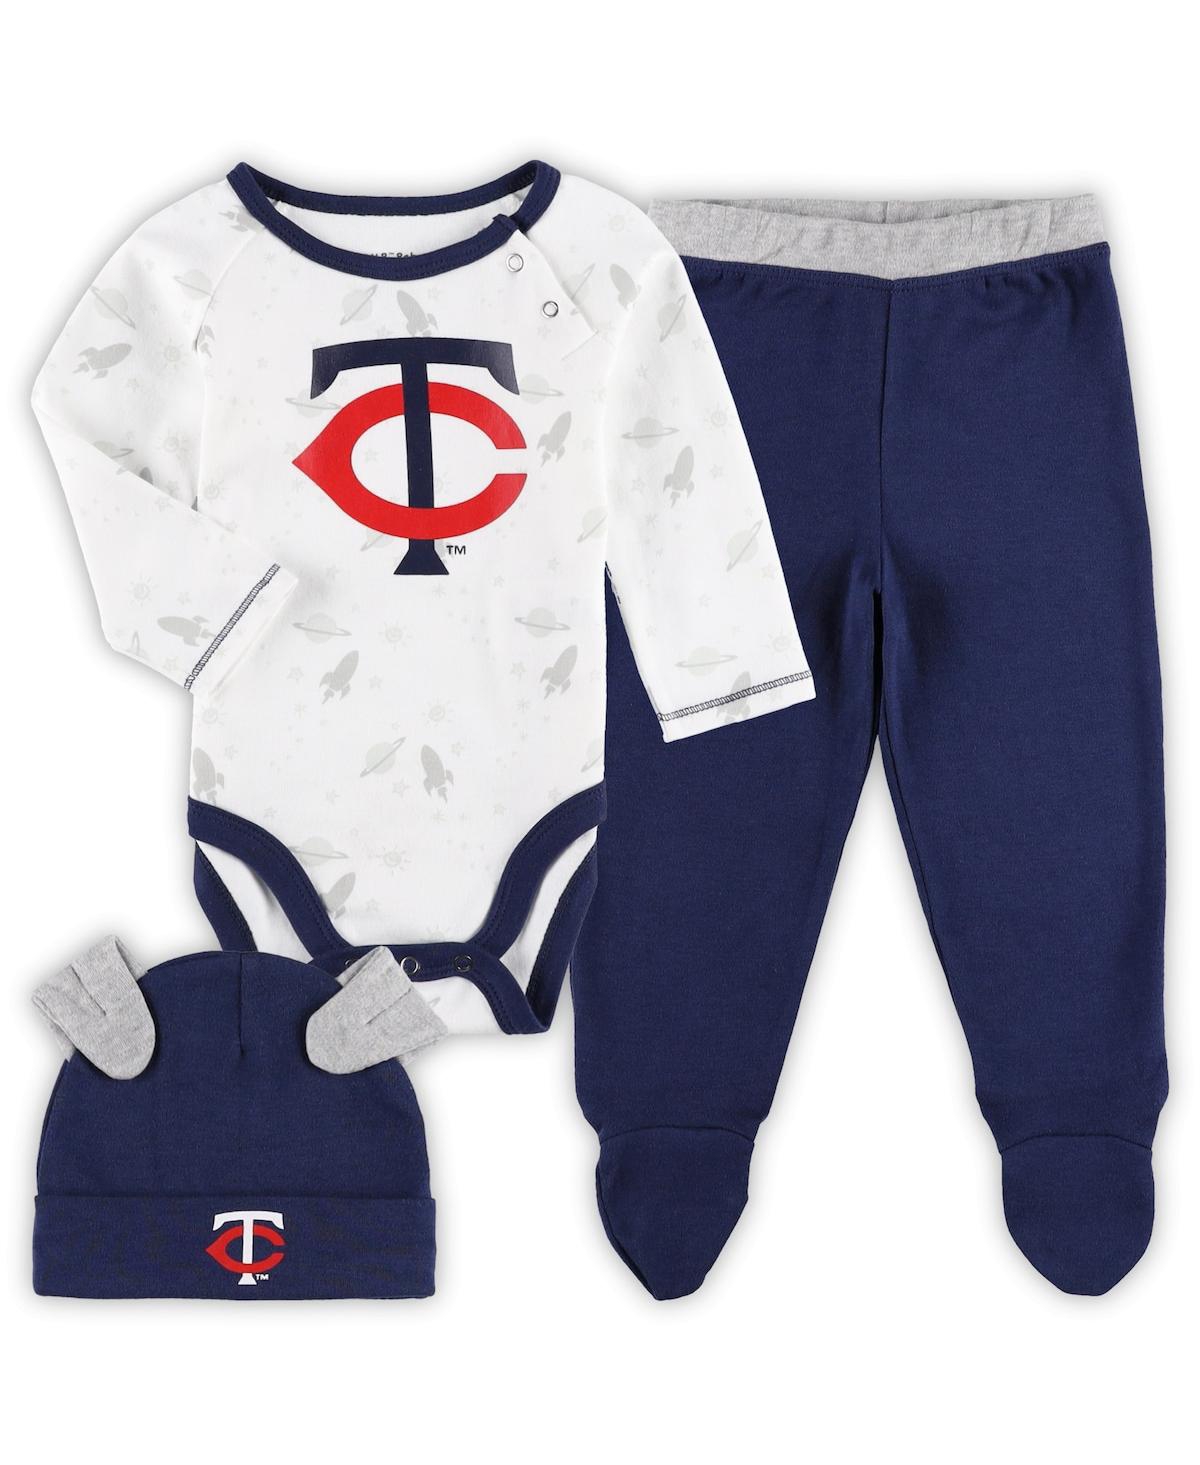 OUTERSTUFF NEWBORN AND INFANT BOYS AND GIRLS NAVY, WHITE MINNESOTA TWINS DREAM TEAM BODYSUIT, HAT AND FOOTED PA